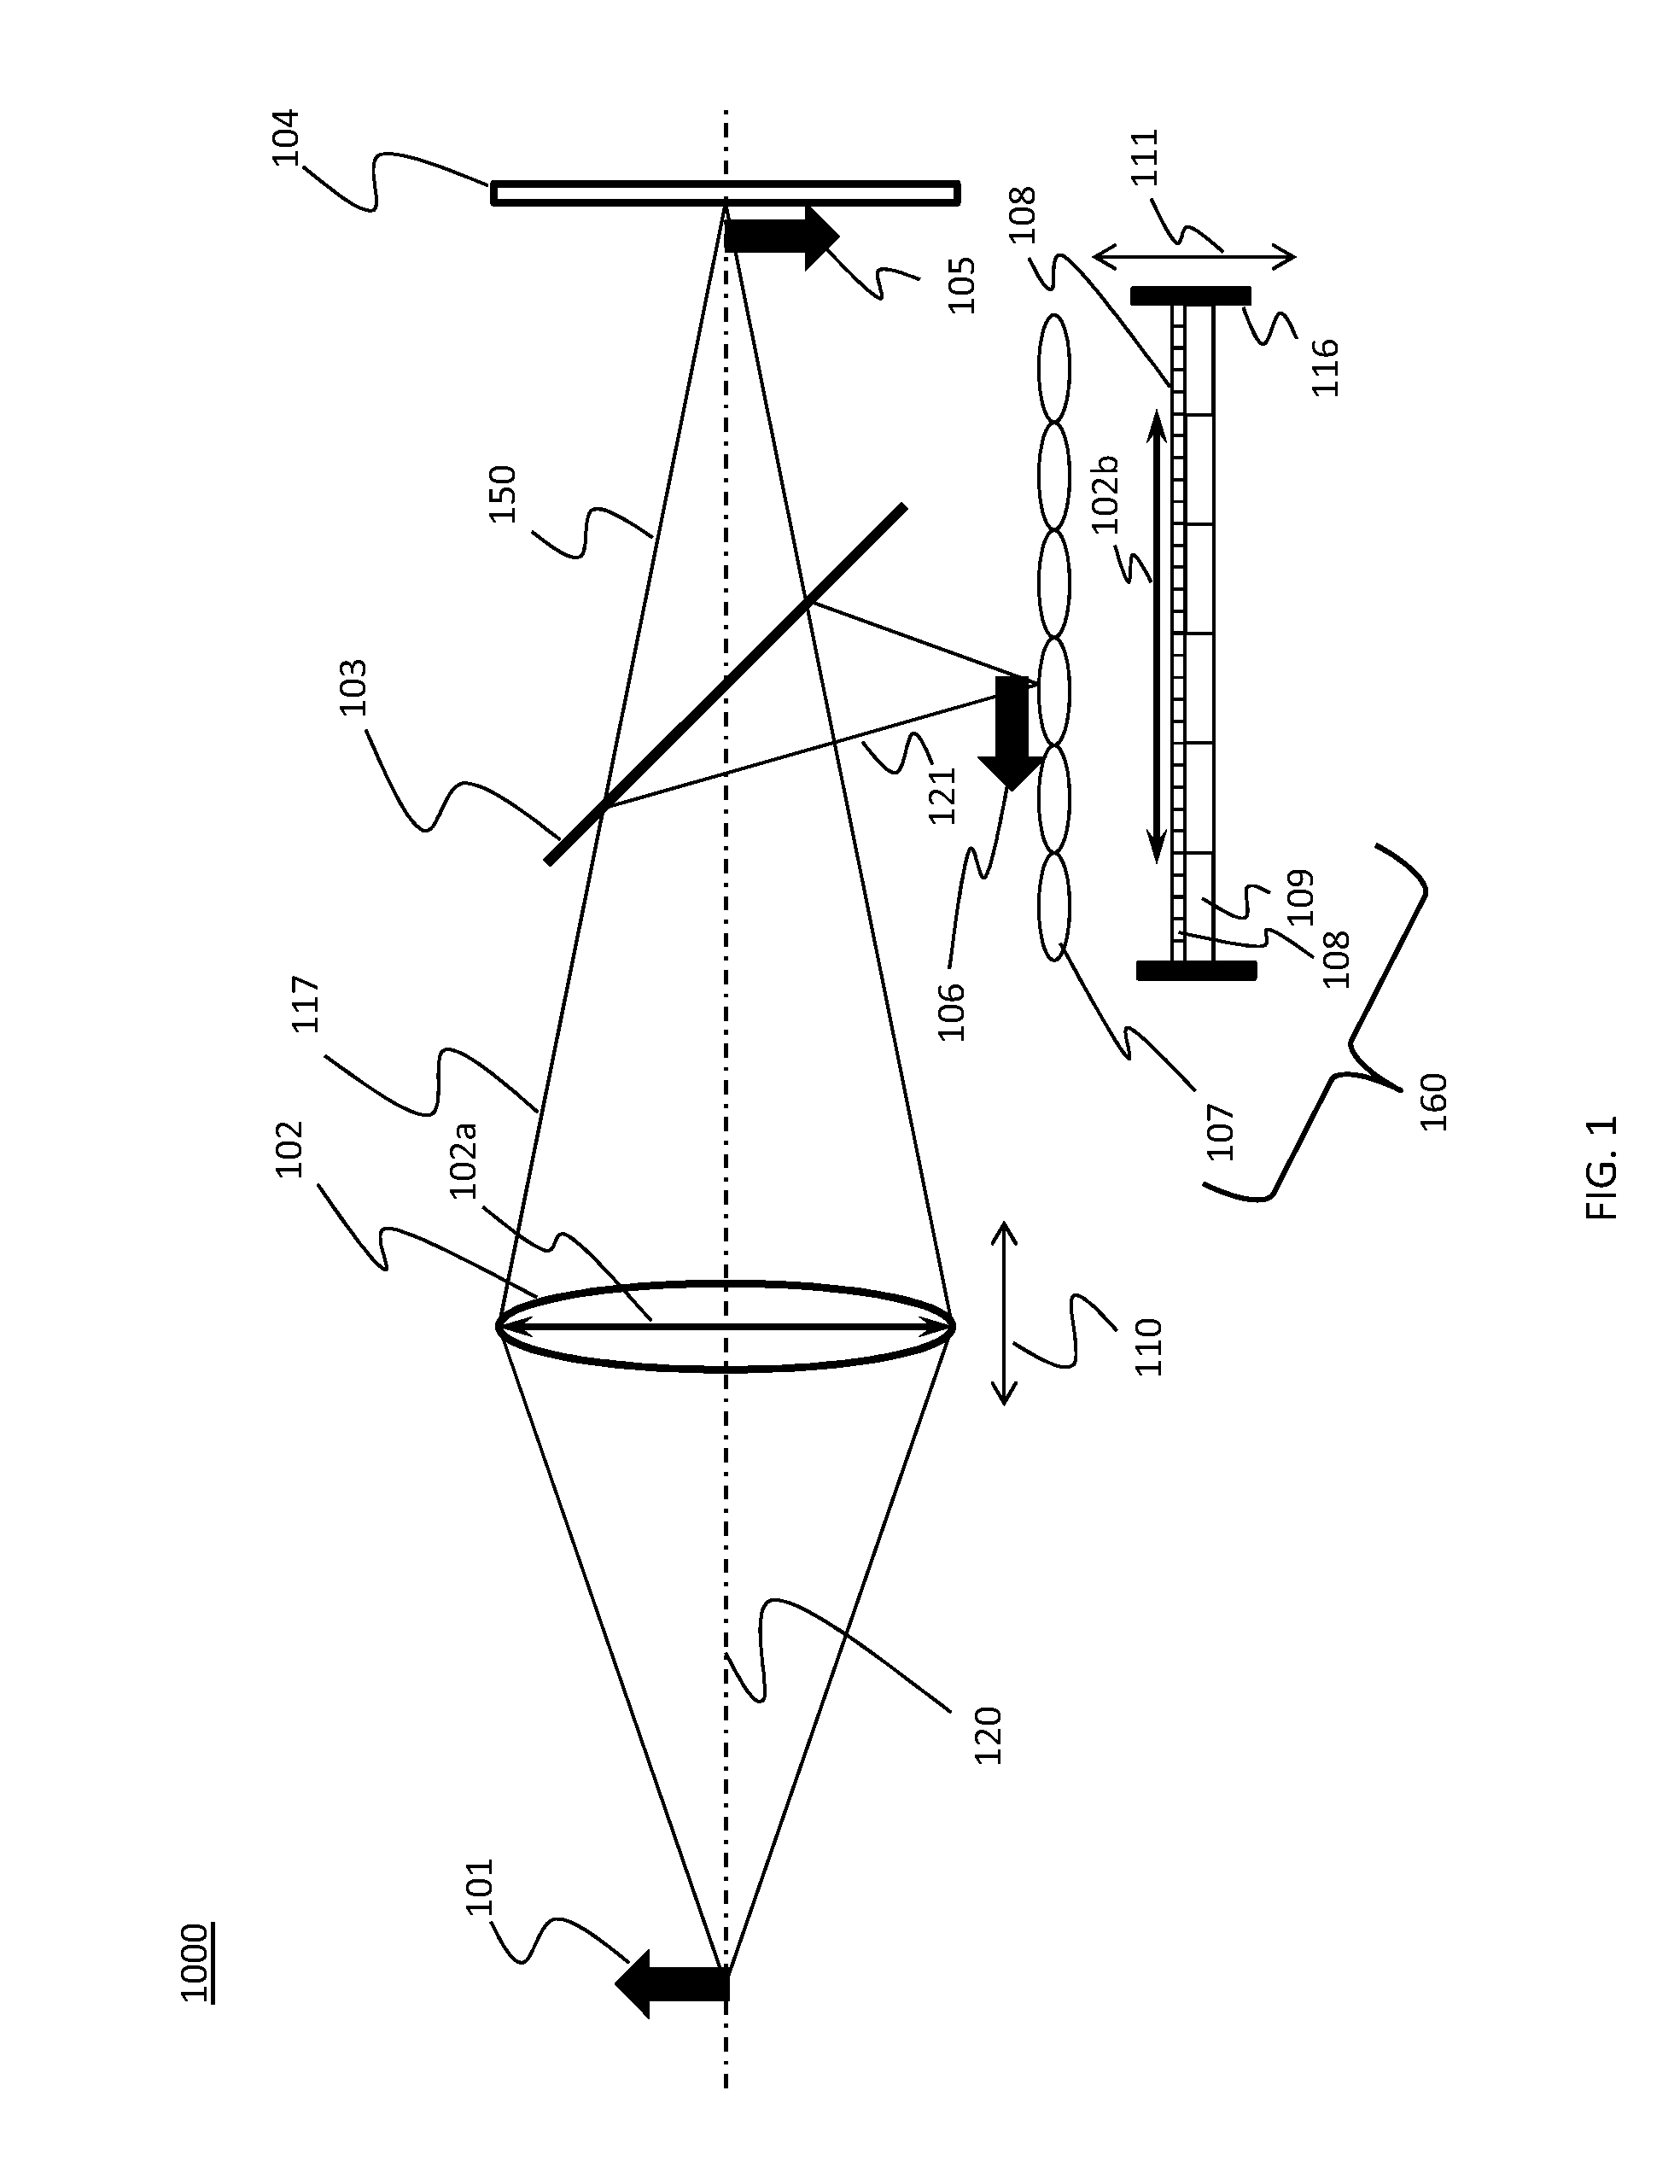 Apparatus and method for acquiring information about light-field data